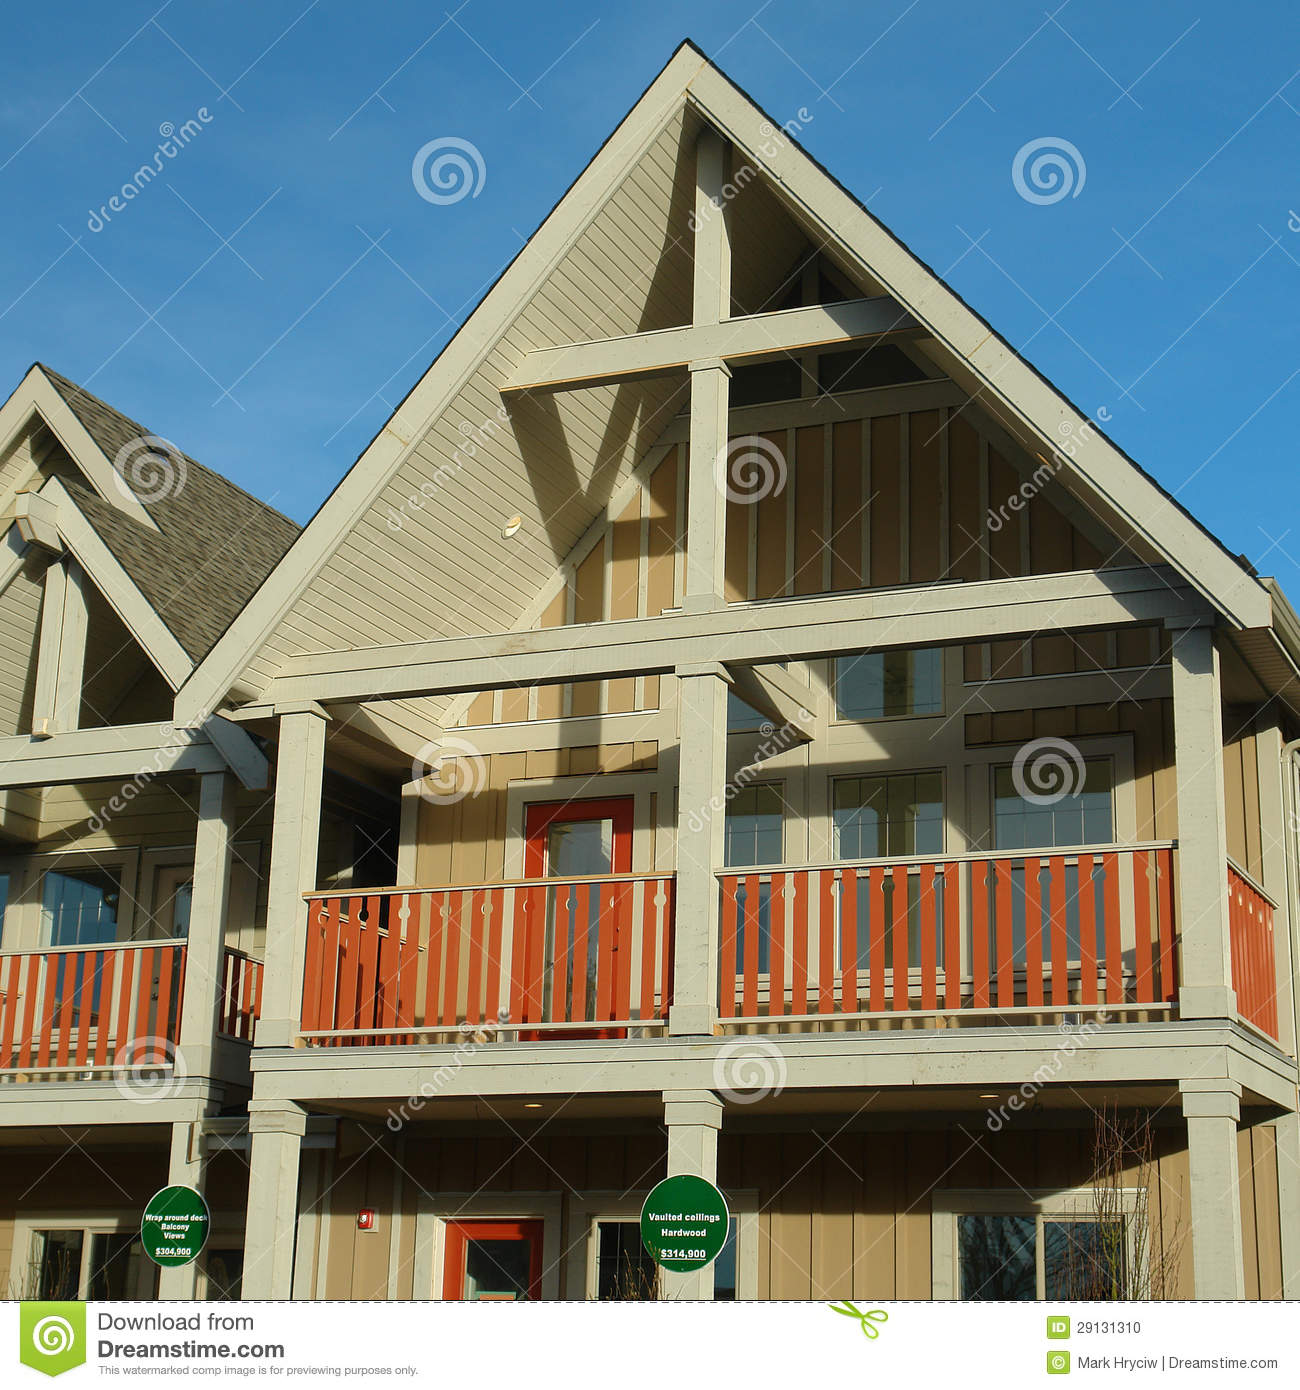 New Homes House For Sale Stock Photo   Image  29131310